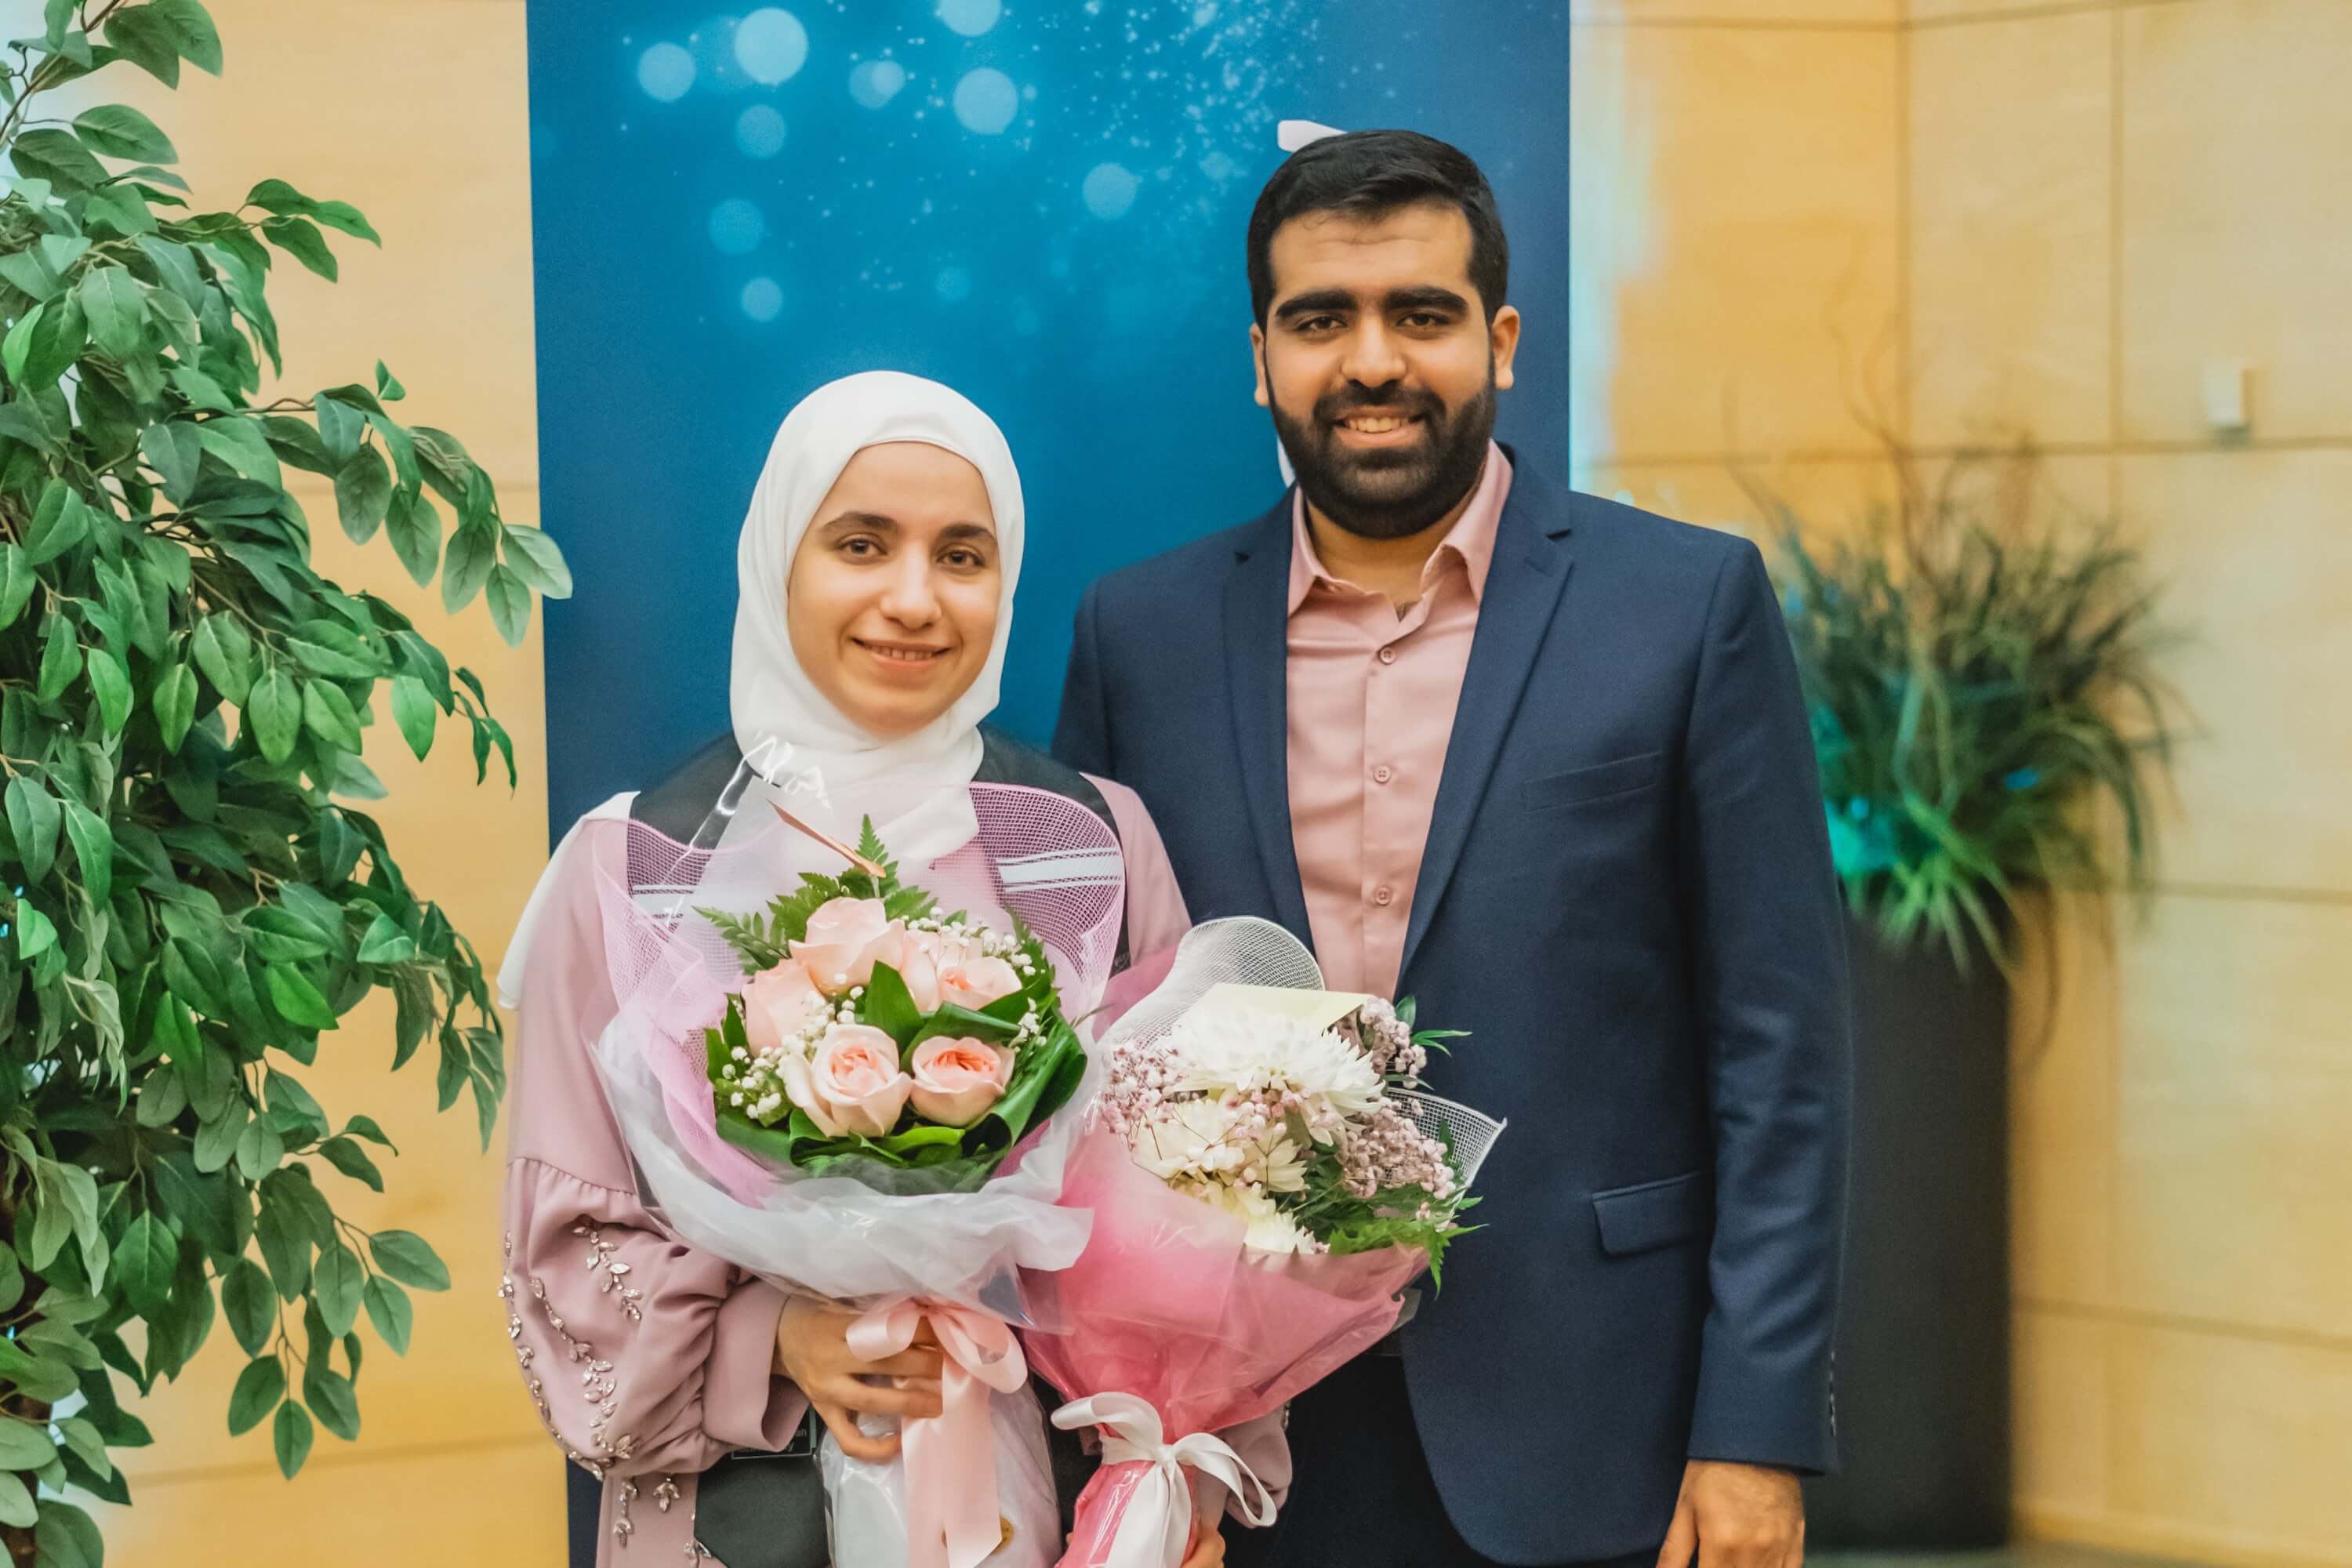 A graduate holding two bouquets of pink flowers standing with a man in a beige shirt and navy blue blazer.